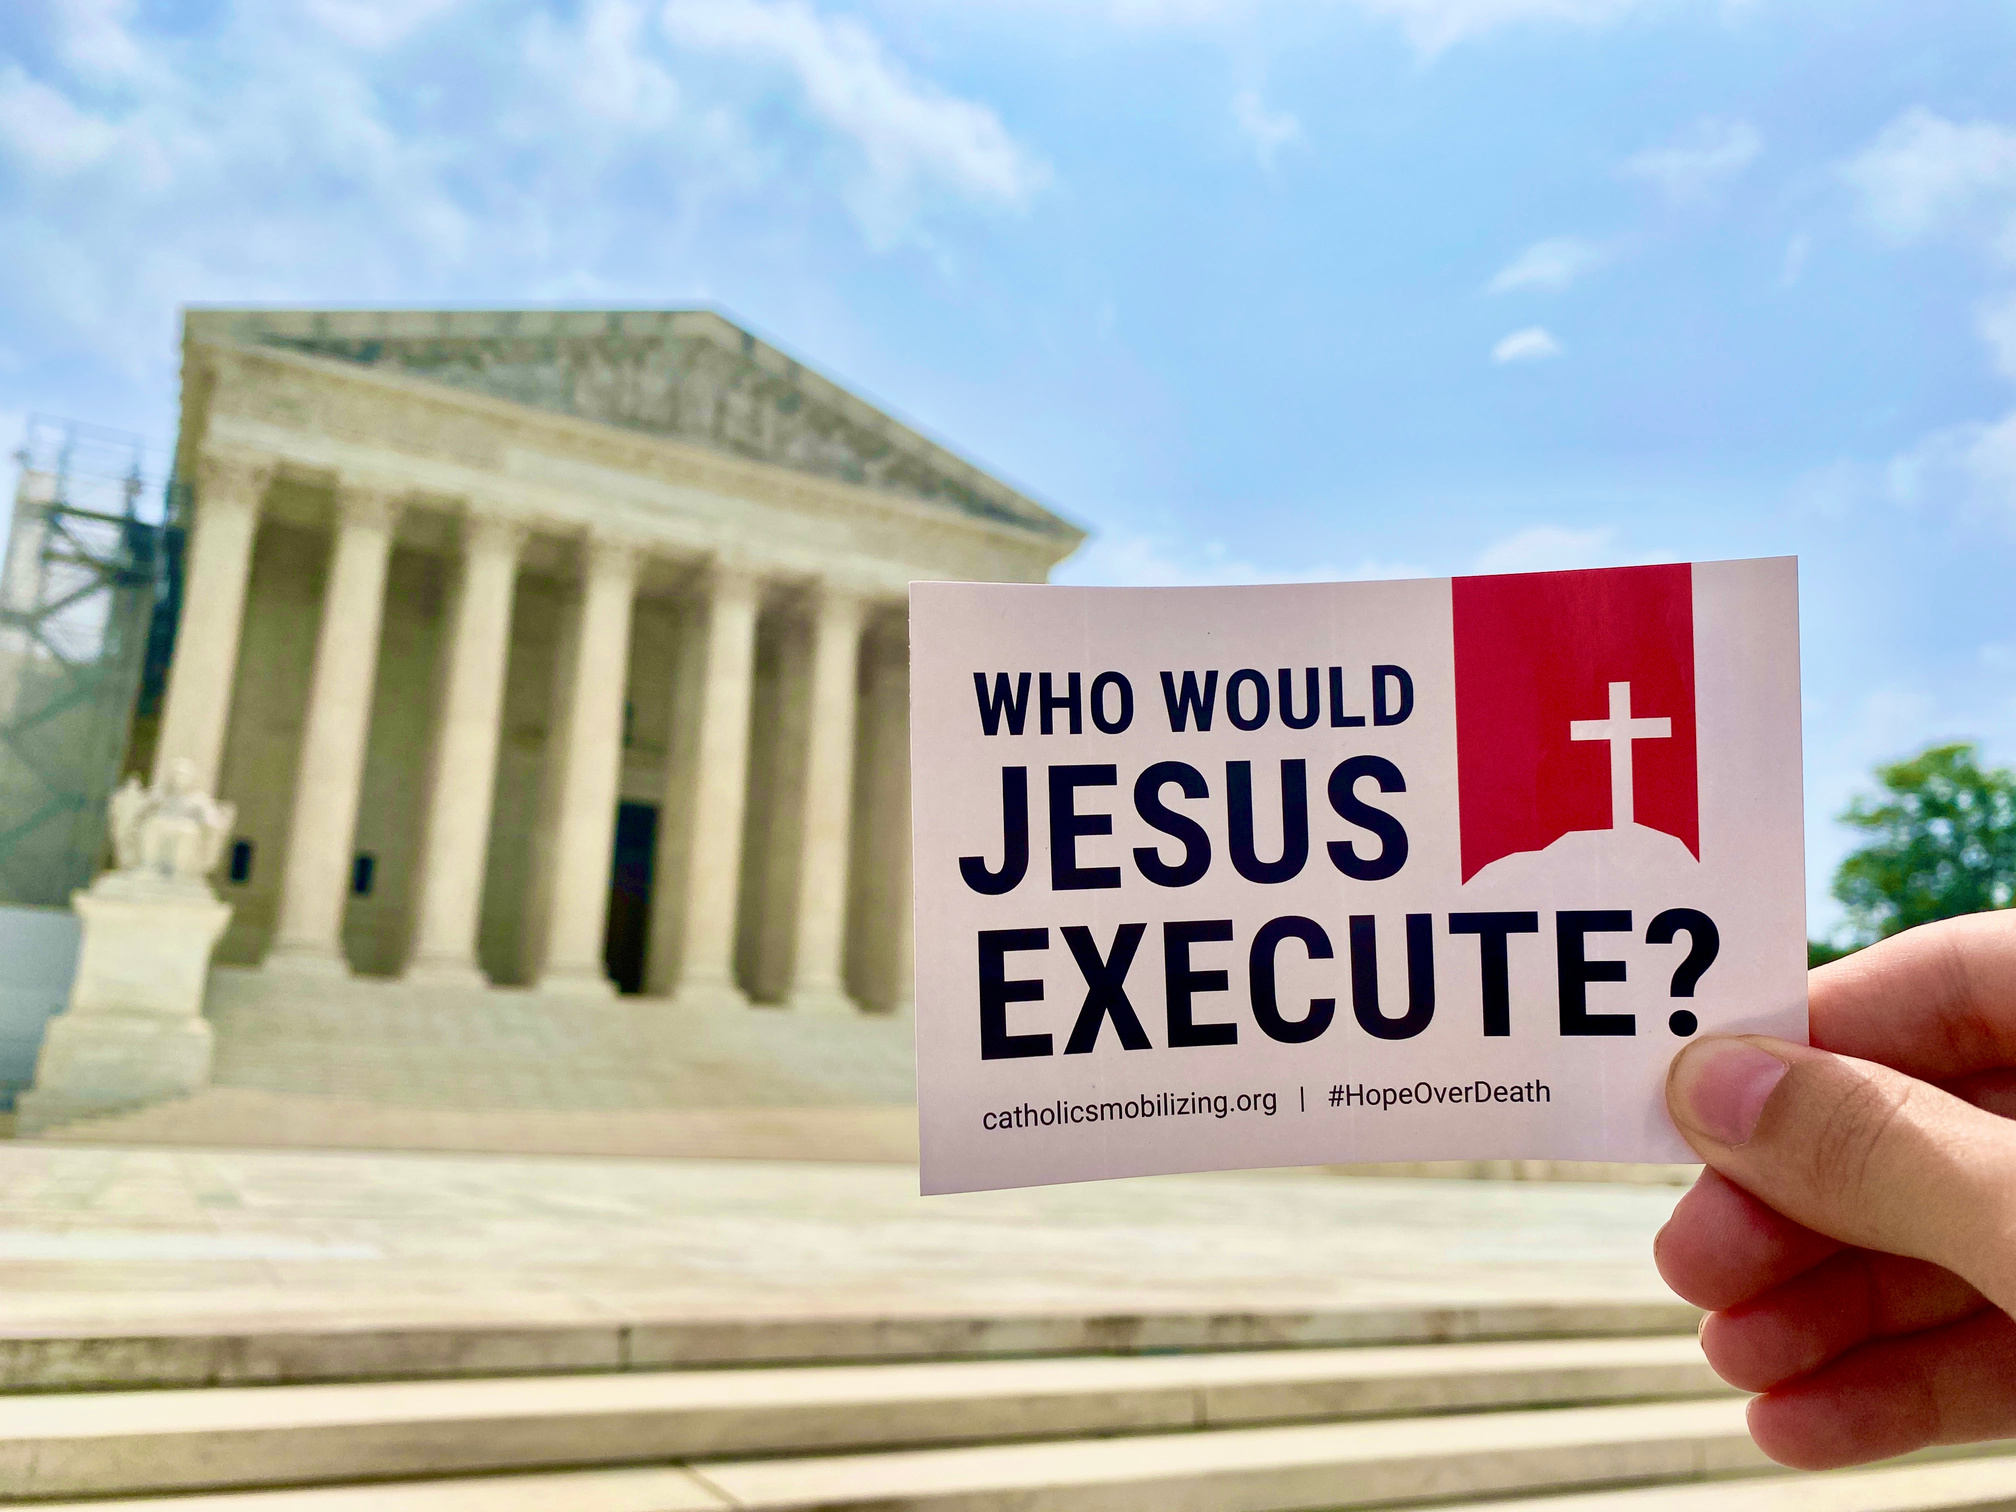 Hand holds sticker that says "Who would jesus execute?" in front of the U.S. Supreme Court